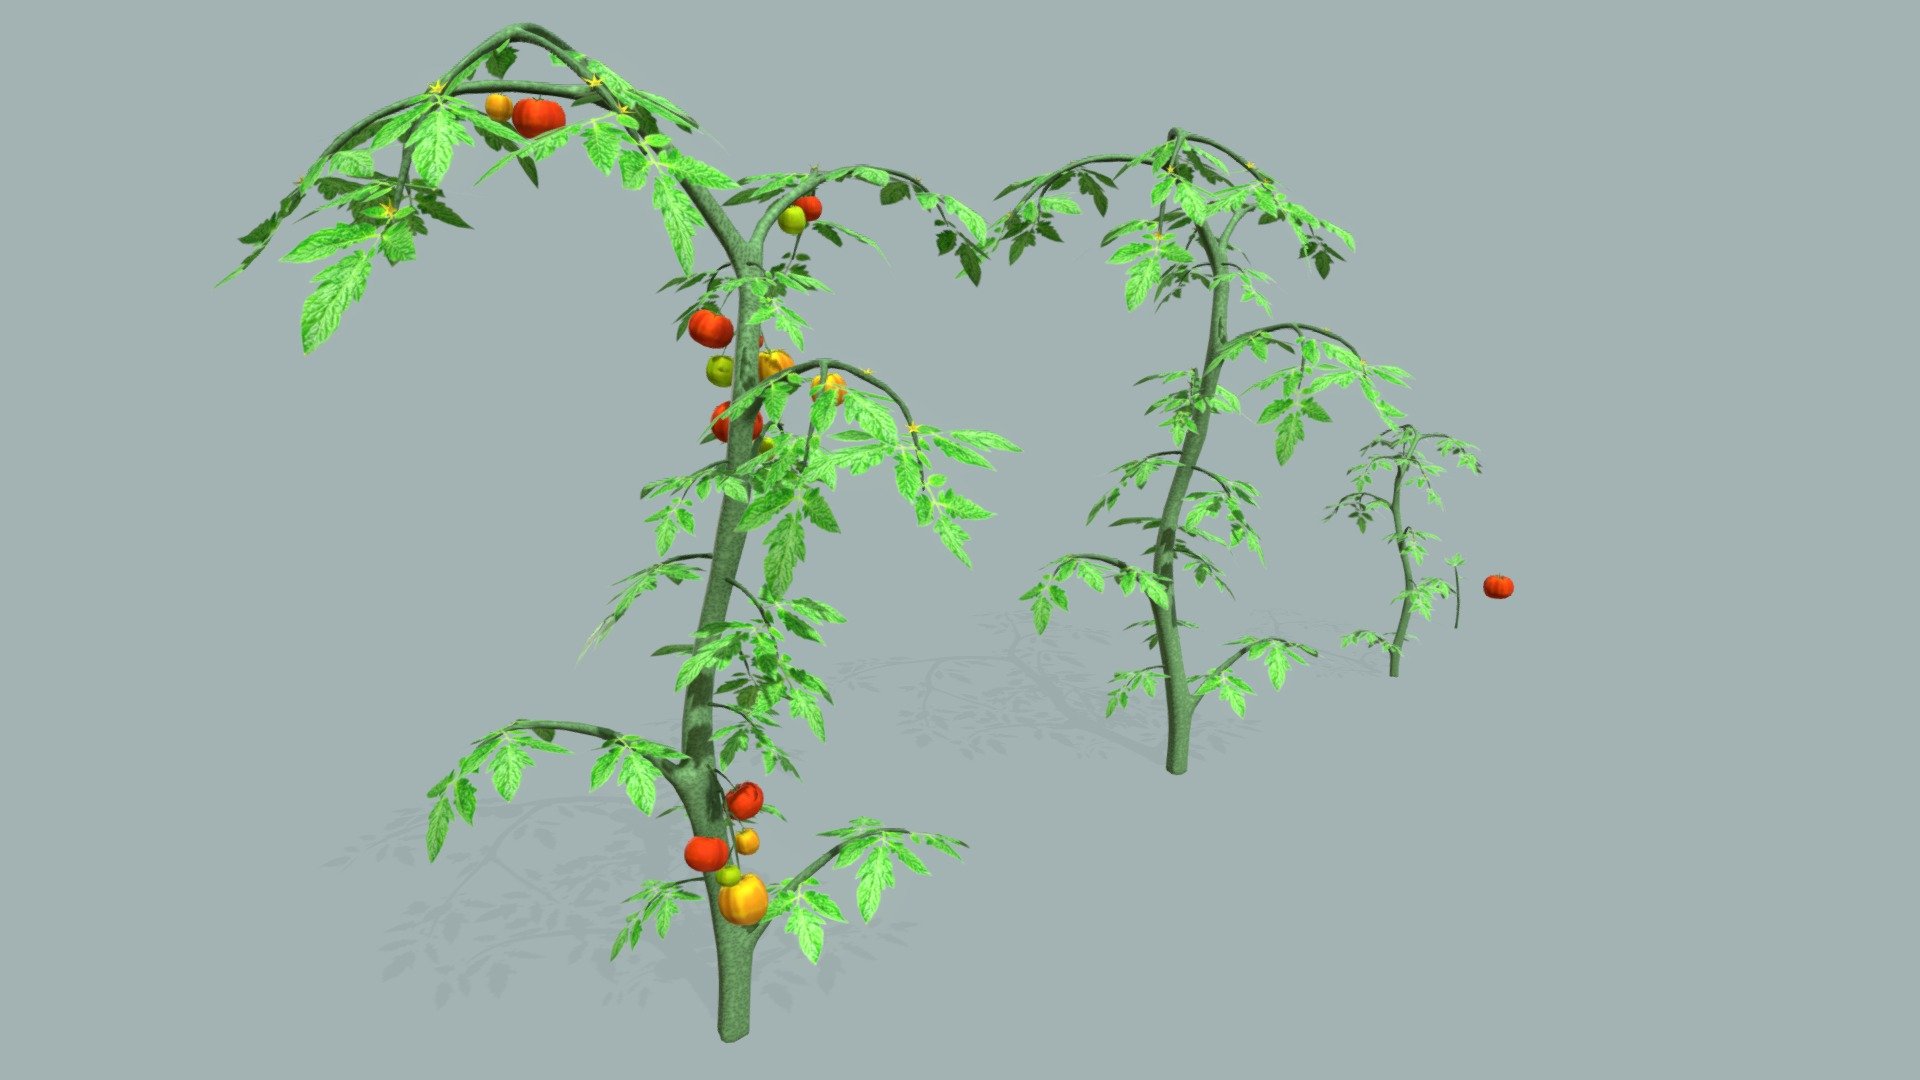 Low poly model of a tomato bush made in a blender

One texture applies to all models

In the additional files I will attach a document with separated models



Textures: 

Texture size 1024 x 1024 in the amount of 4 pieces



Basic color map (albedo)

Normal map

Occlusal roughness metallic (RGB)

Emmisive


Description of models:





Tomato bush high
  vert - 6509
 tris - 10670




Tomato bush high without tomato
 vert - 2697 

                                   tris - 3992




Tomato bush middle
              vert - 2263
 
                                   tris - 3439




Tomato bush small
               vert - 124
 
                                   tris - 168




Tomato
                          vert - 216
 
                                   tris - 382


 - Tomato bush - Buy Royalty Free 3D model by Vladislav99 3d model